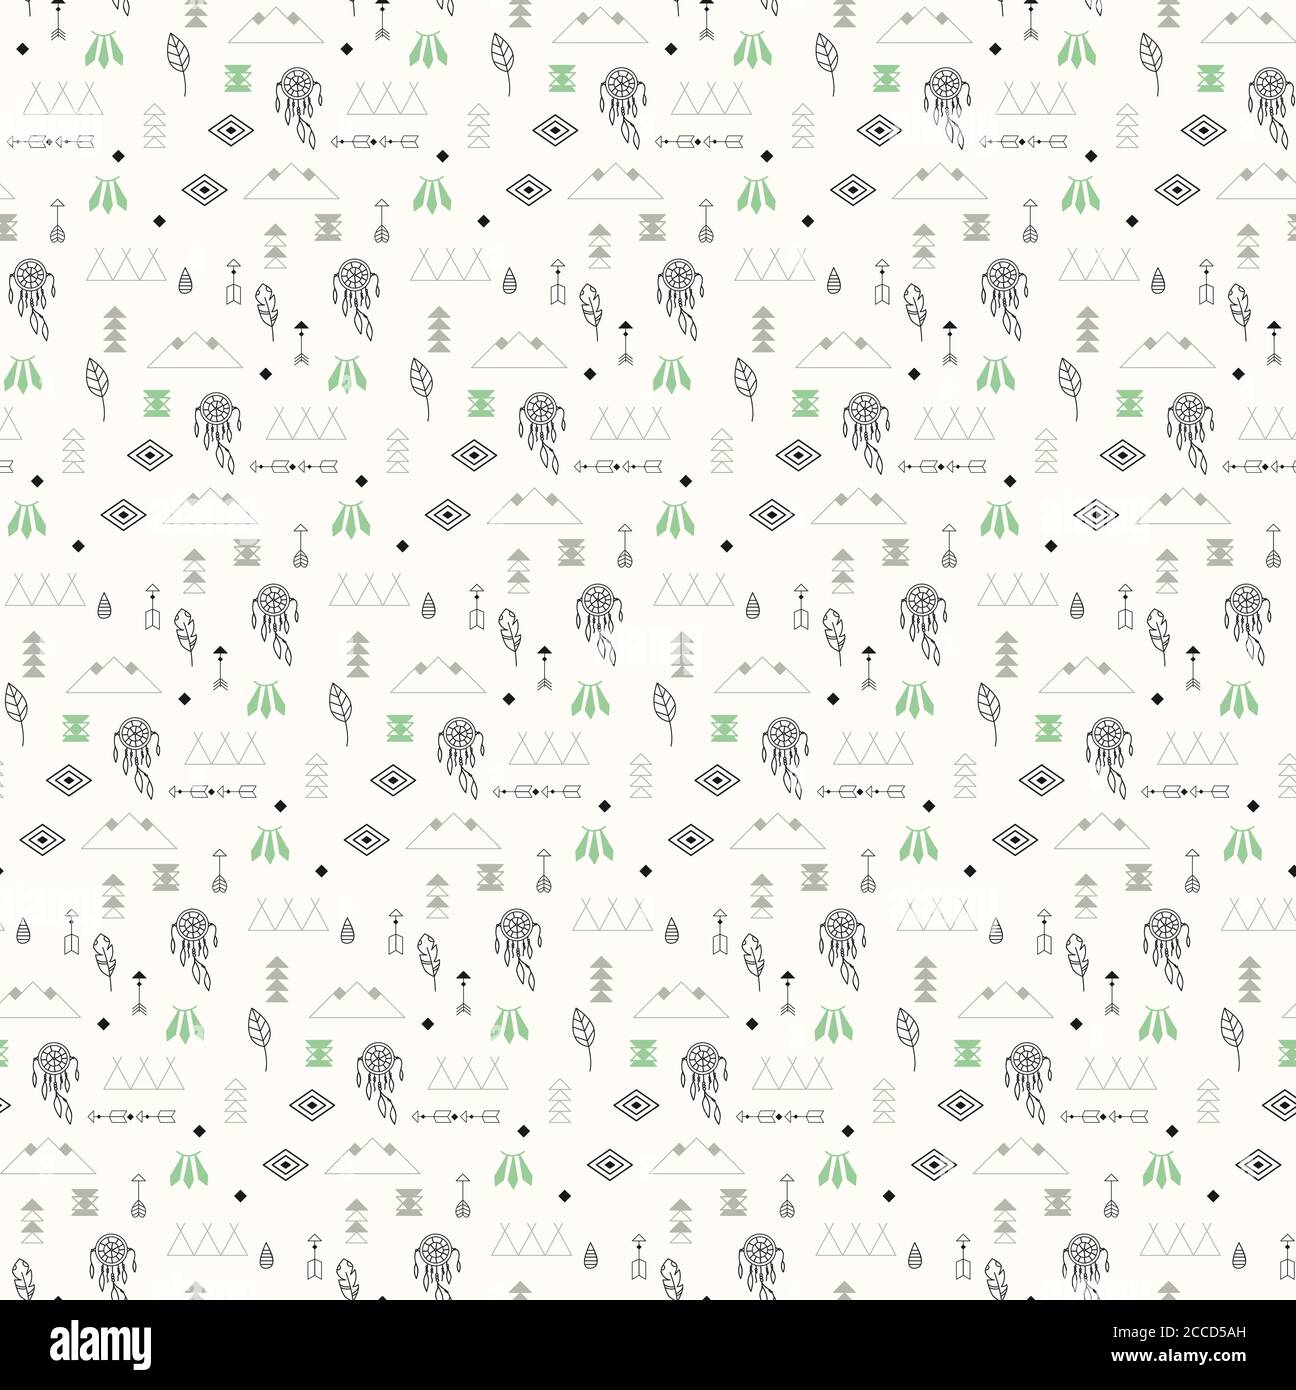 Seamless pattern with native American symbols, vector illustration Stock Vector